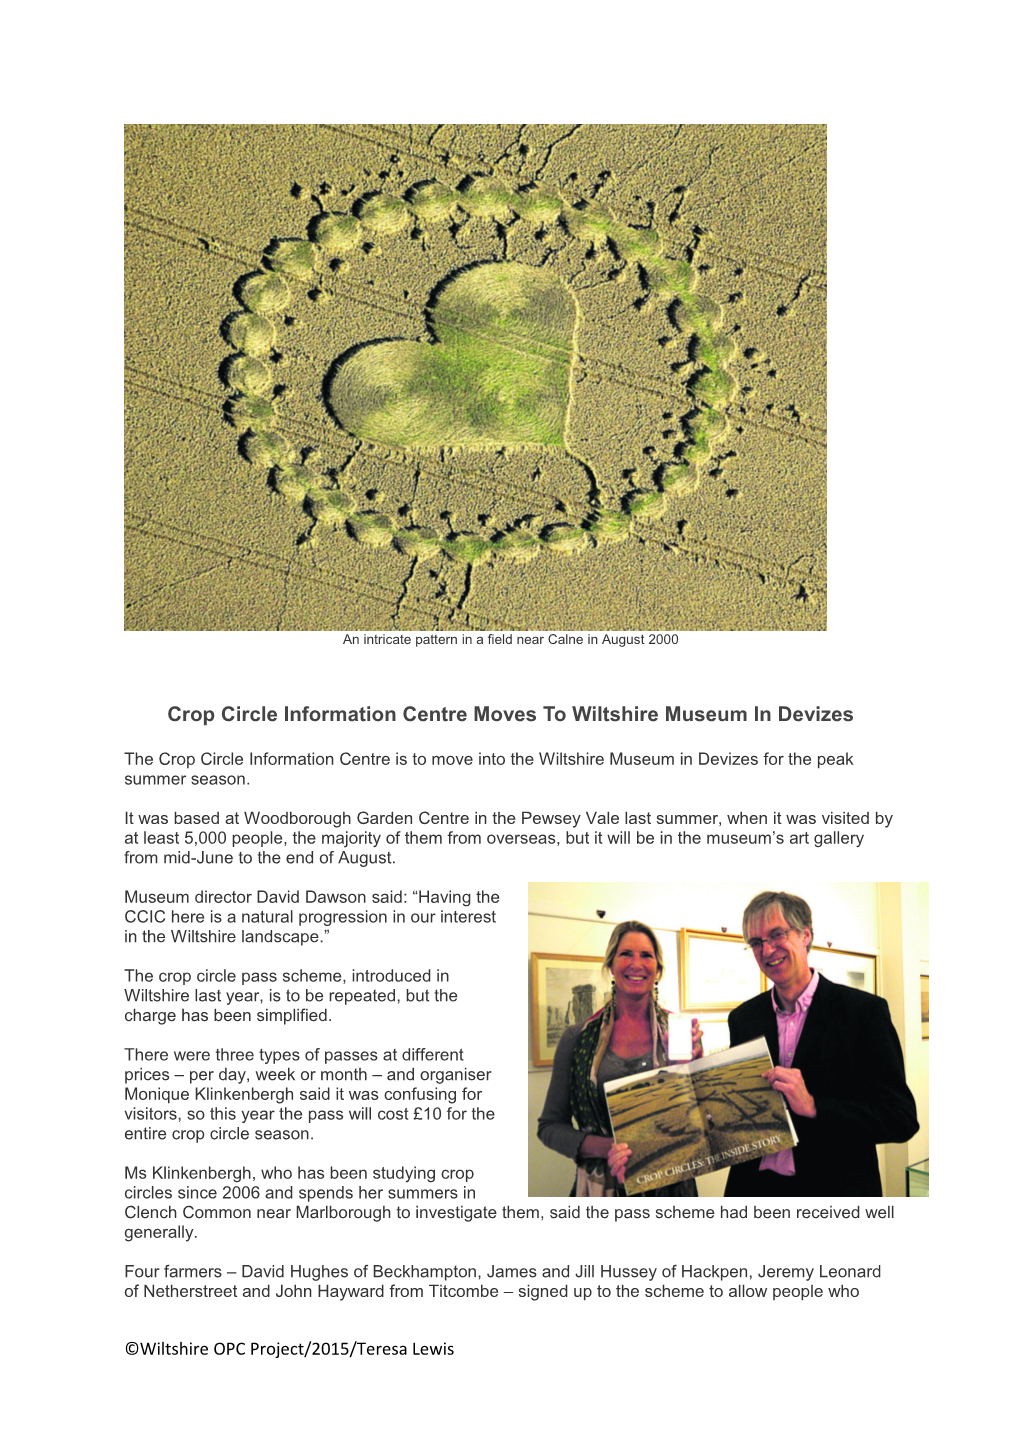 Crop Circle Information Centre Moves to Wiltshire Museum in Devizes